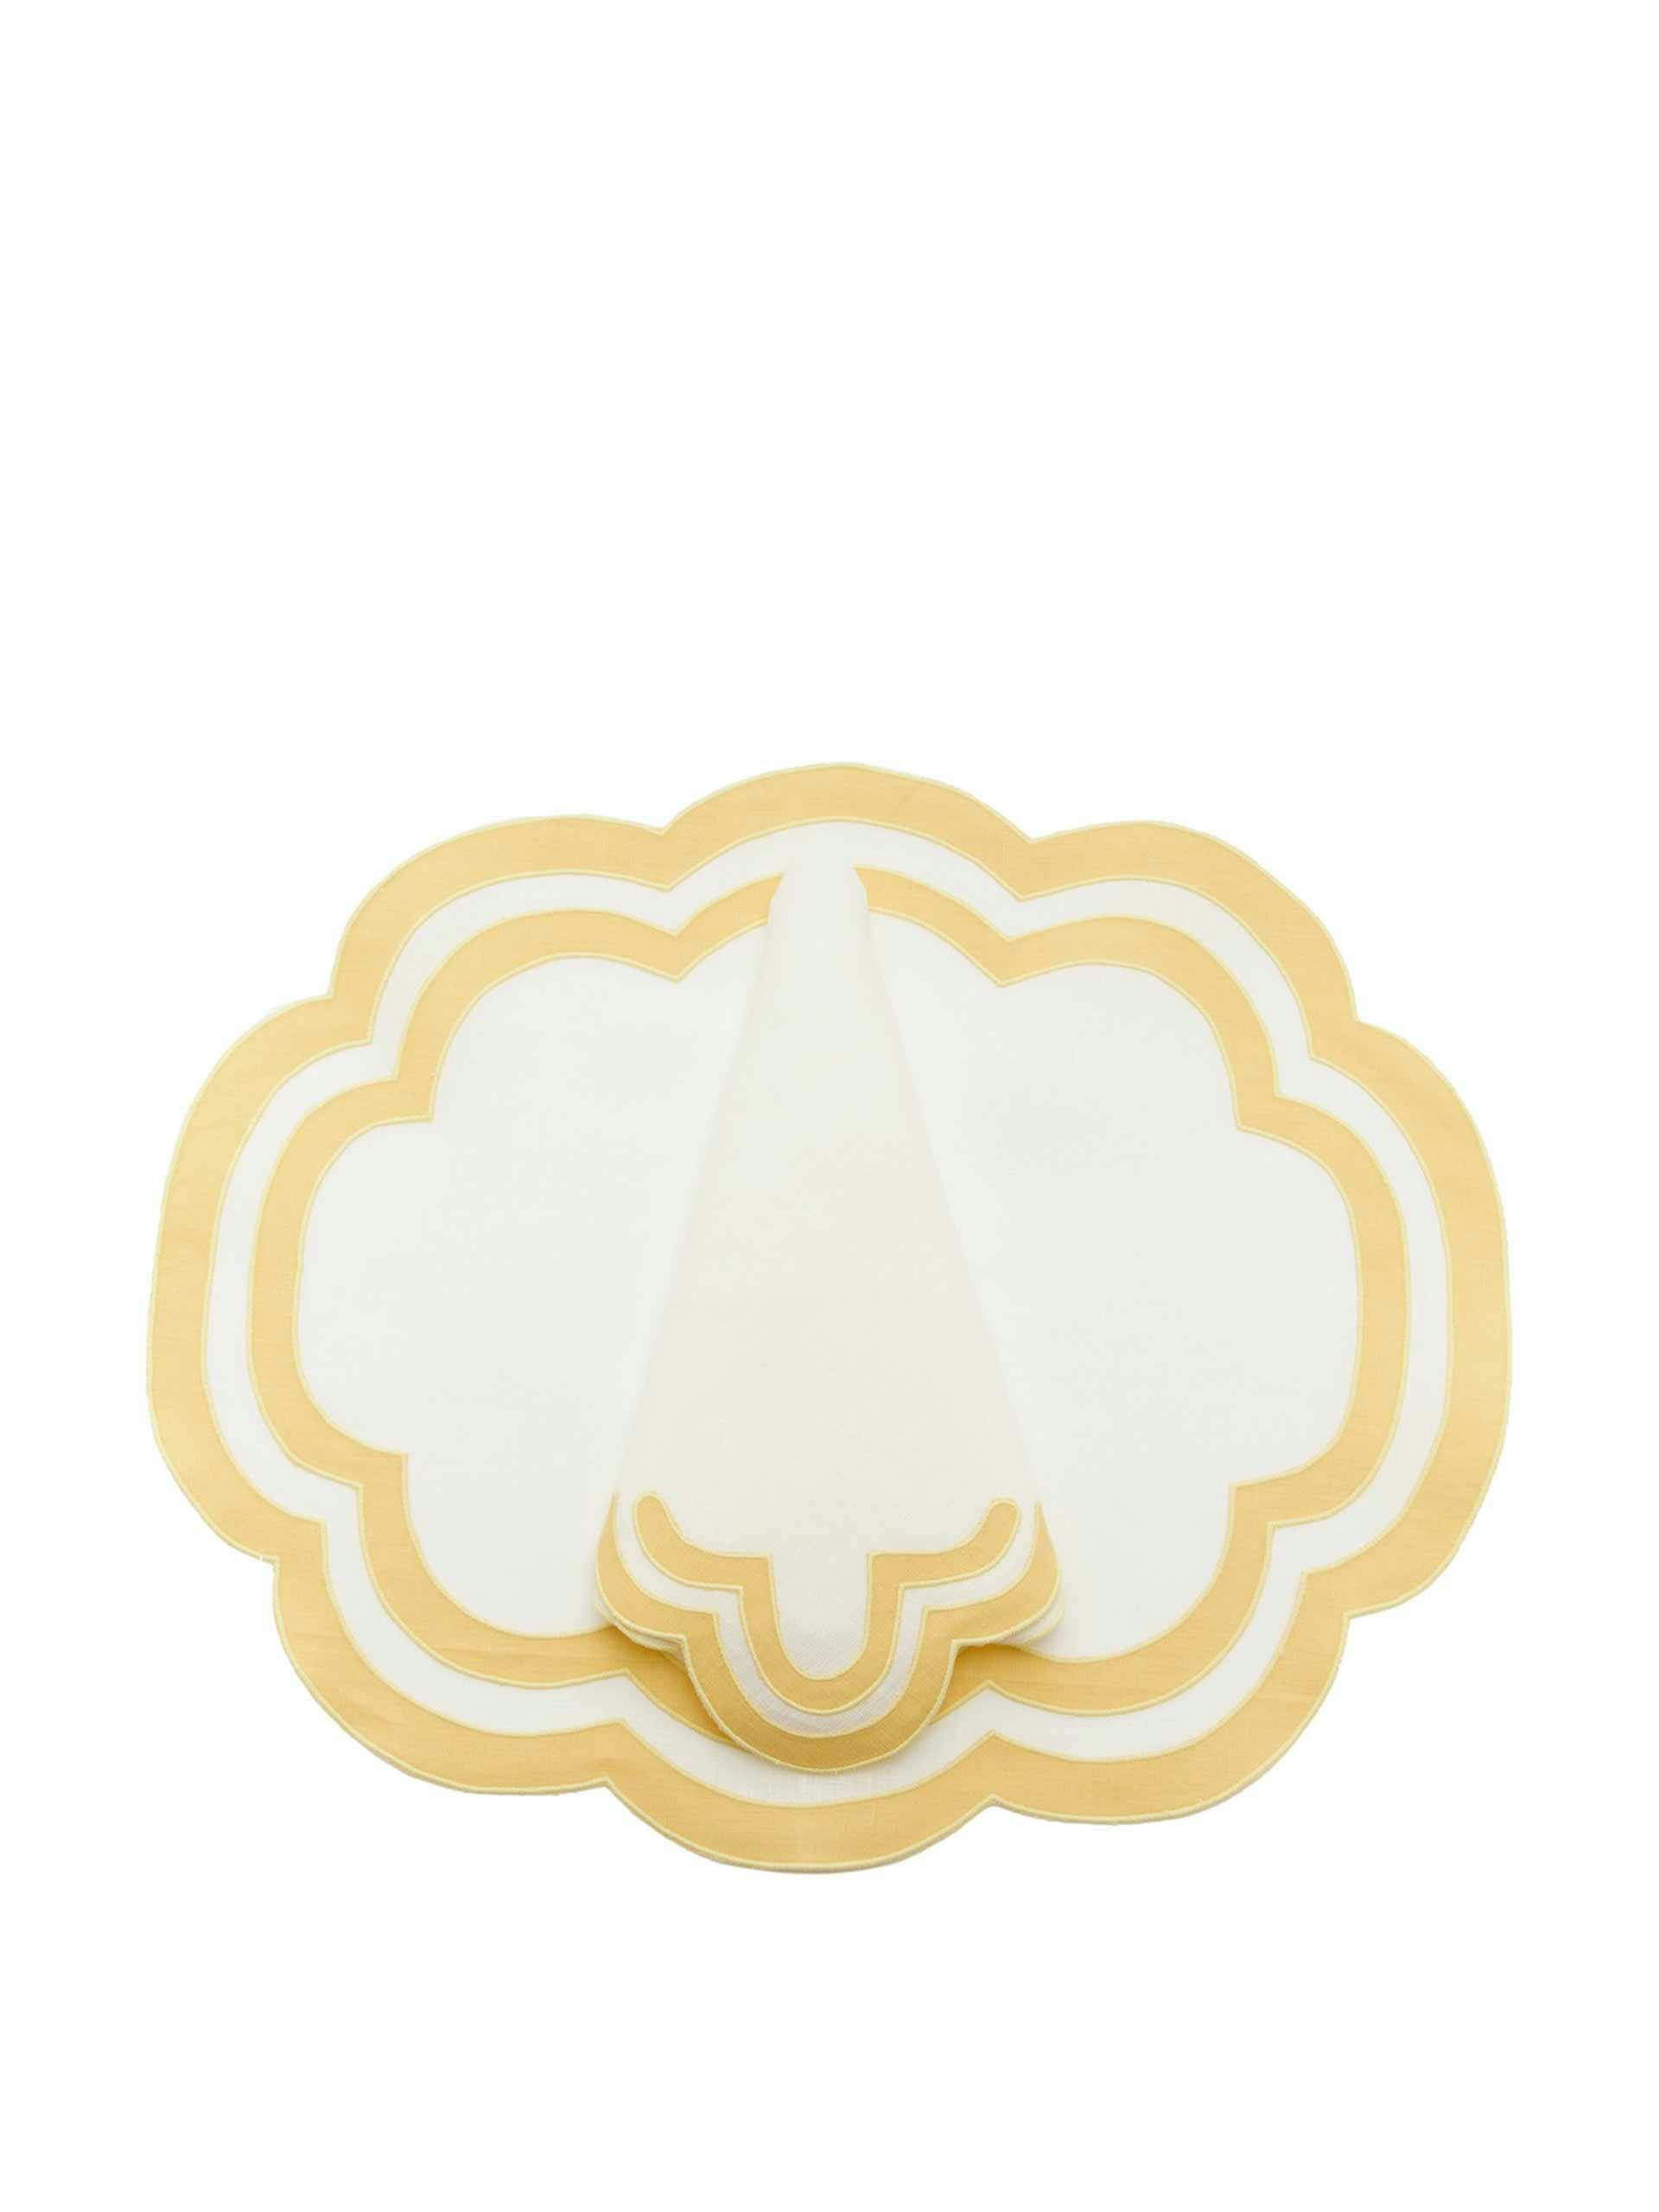 Scalloped linen placemat and napkin set